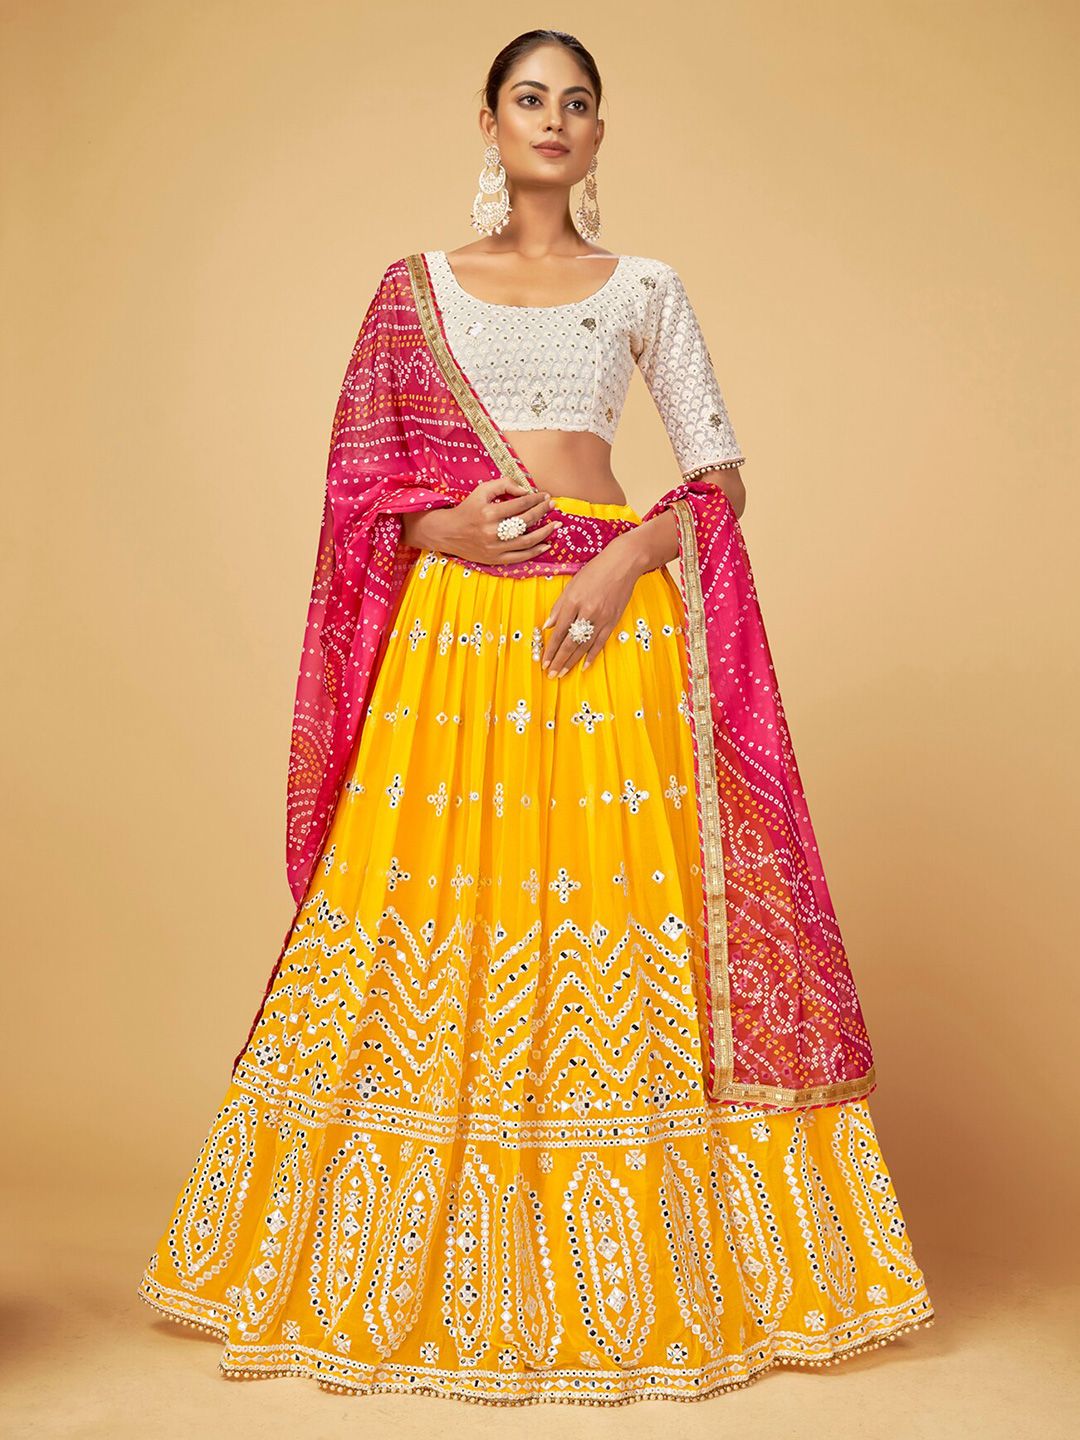 Cloth's Villa Yellow & Pink Embroidered Semi-Stitched Lehenga & Unstitched Blouse With Dupatta Price in India